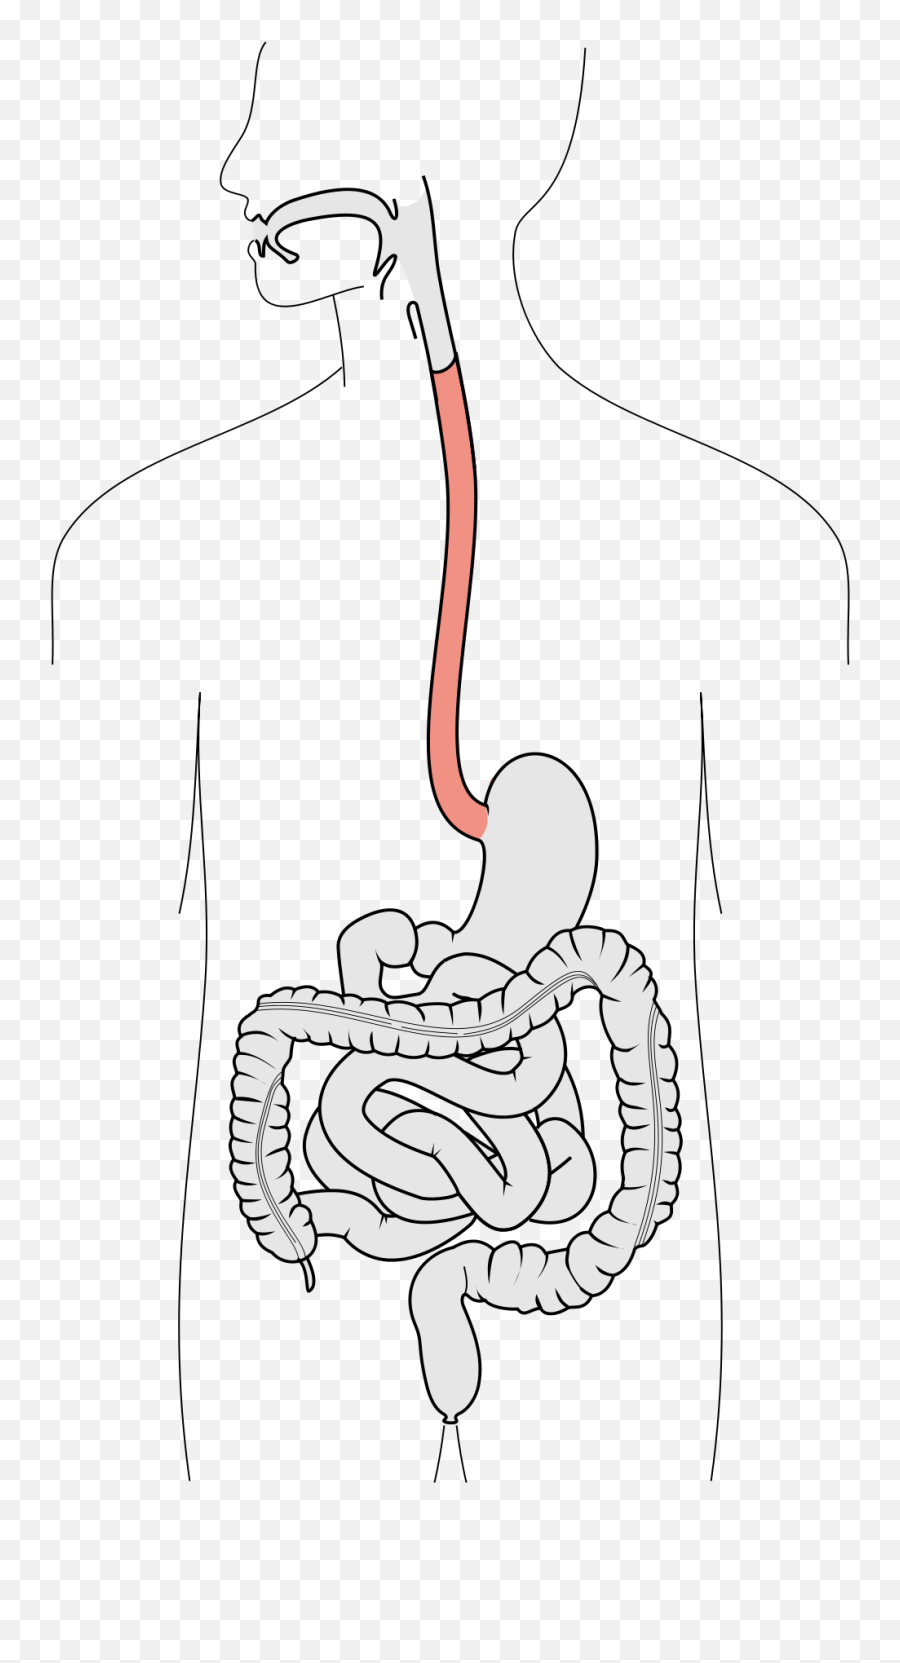 Esophagus - Wikipedia Esophagus In The Digestive System Png,Feels Bad Man Png